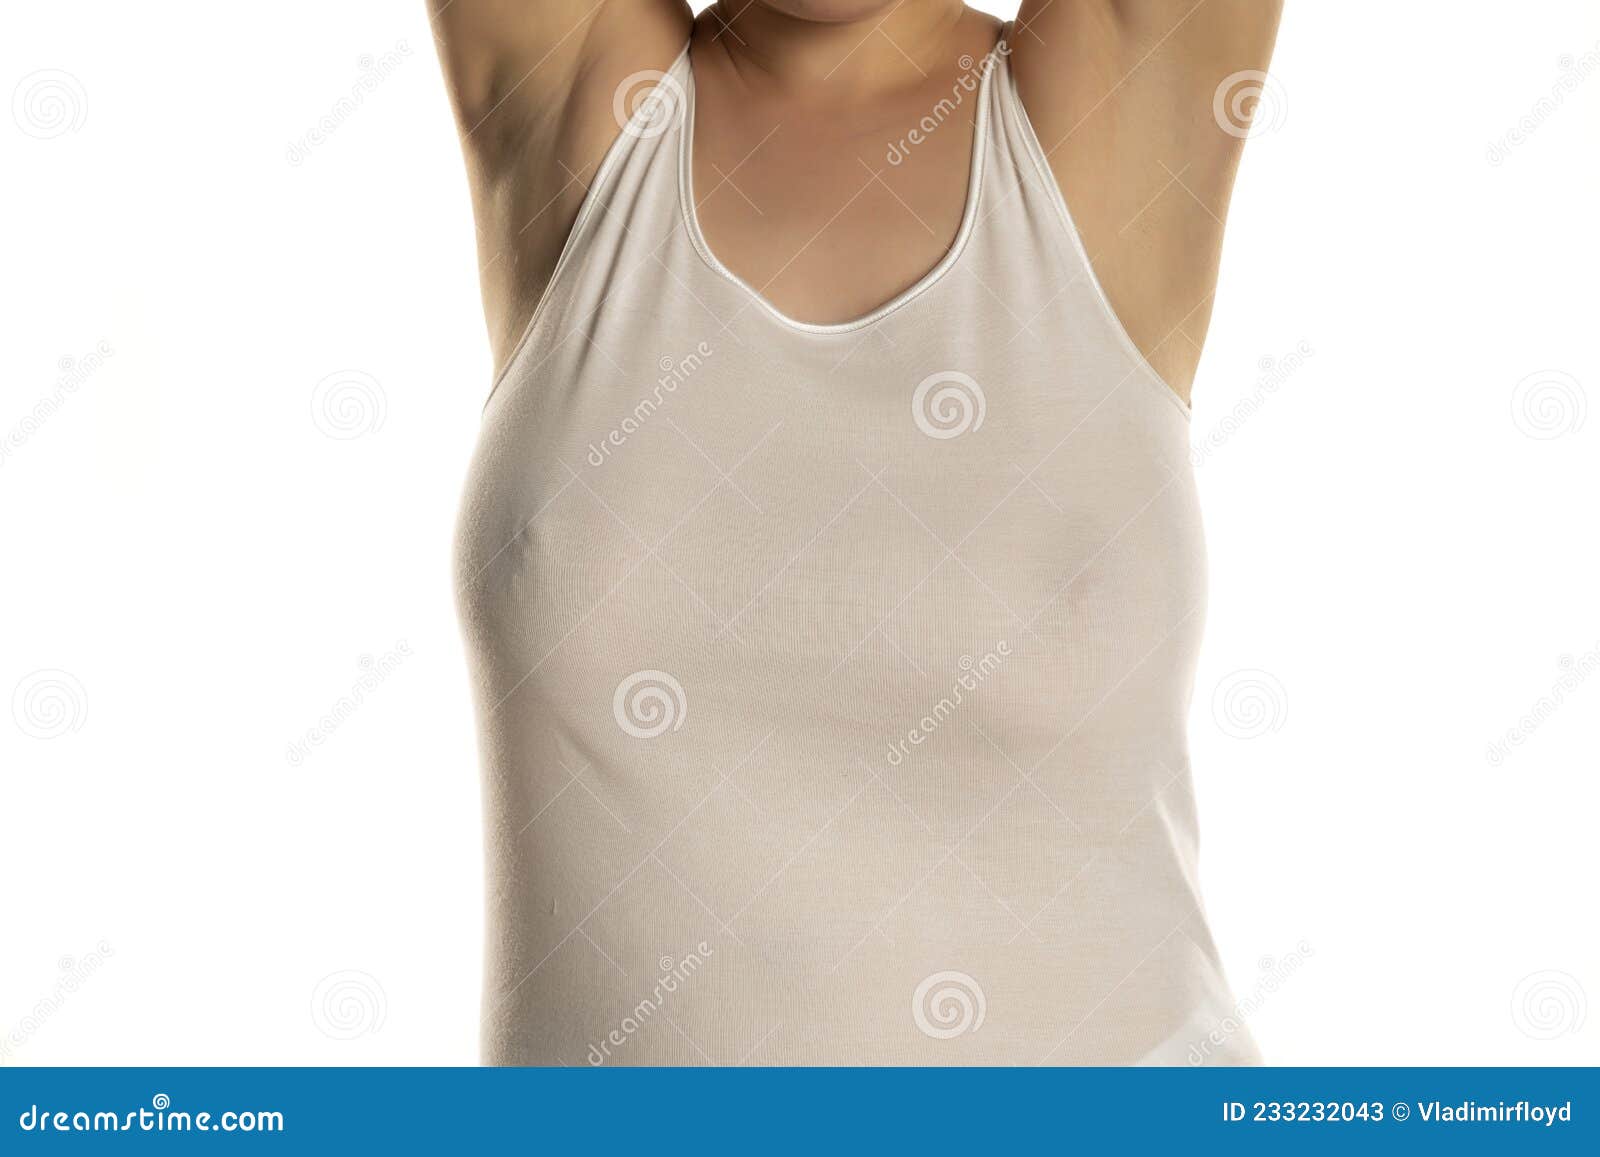 A Woman with Big Breasts without a Bra in a White Shirt Stock